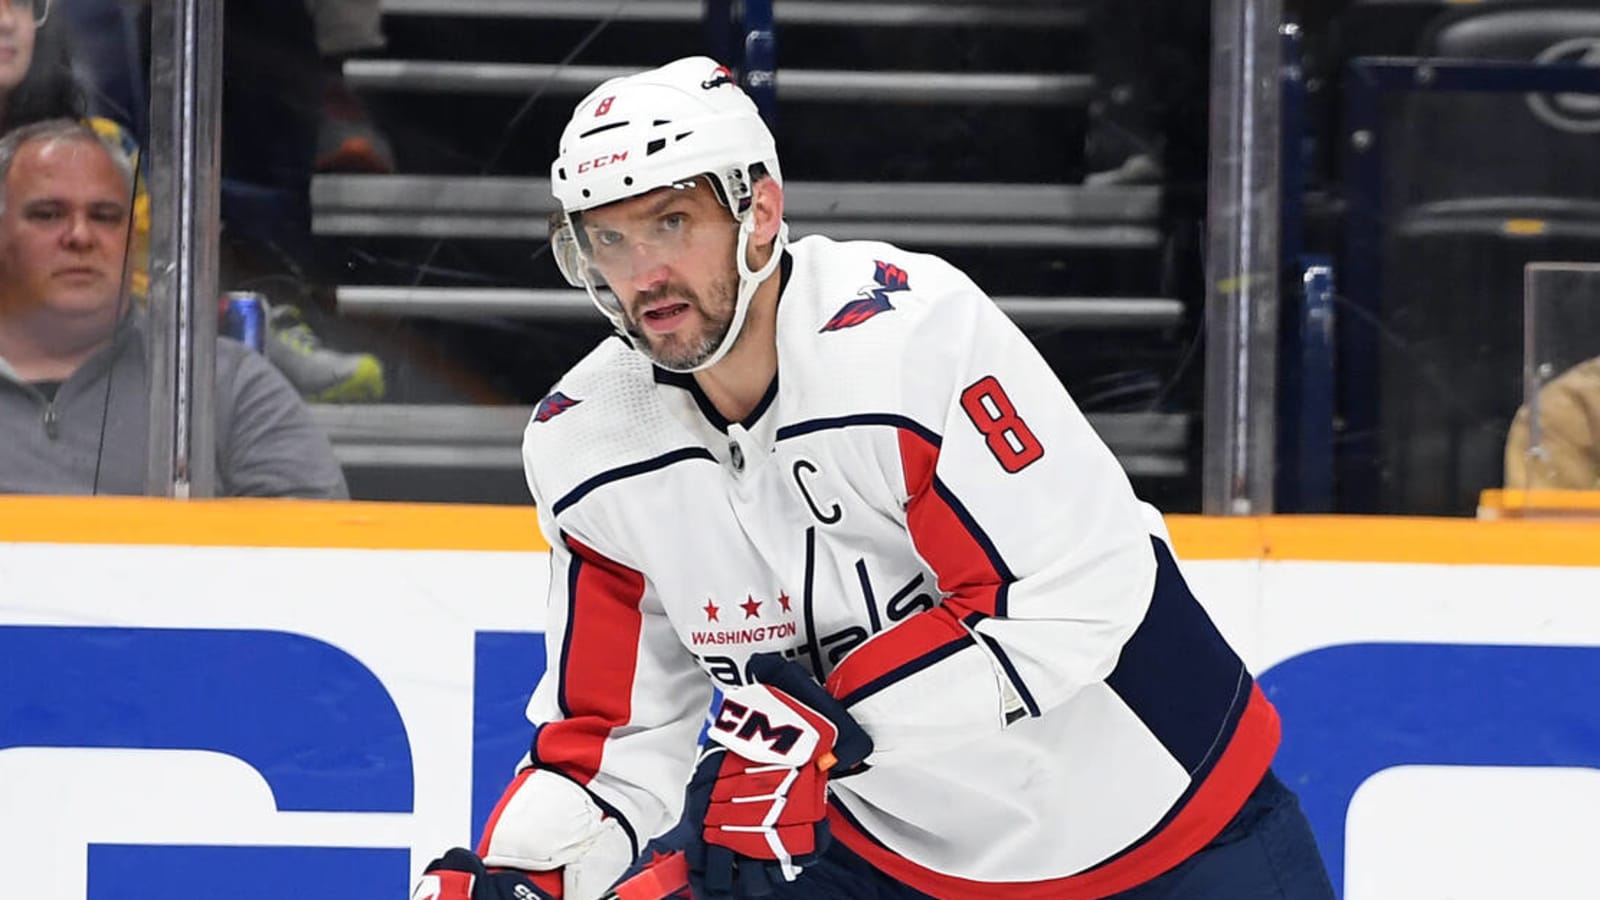 Alex Ovechkin ties Gordie Howe for most goals with one team